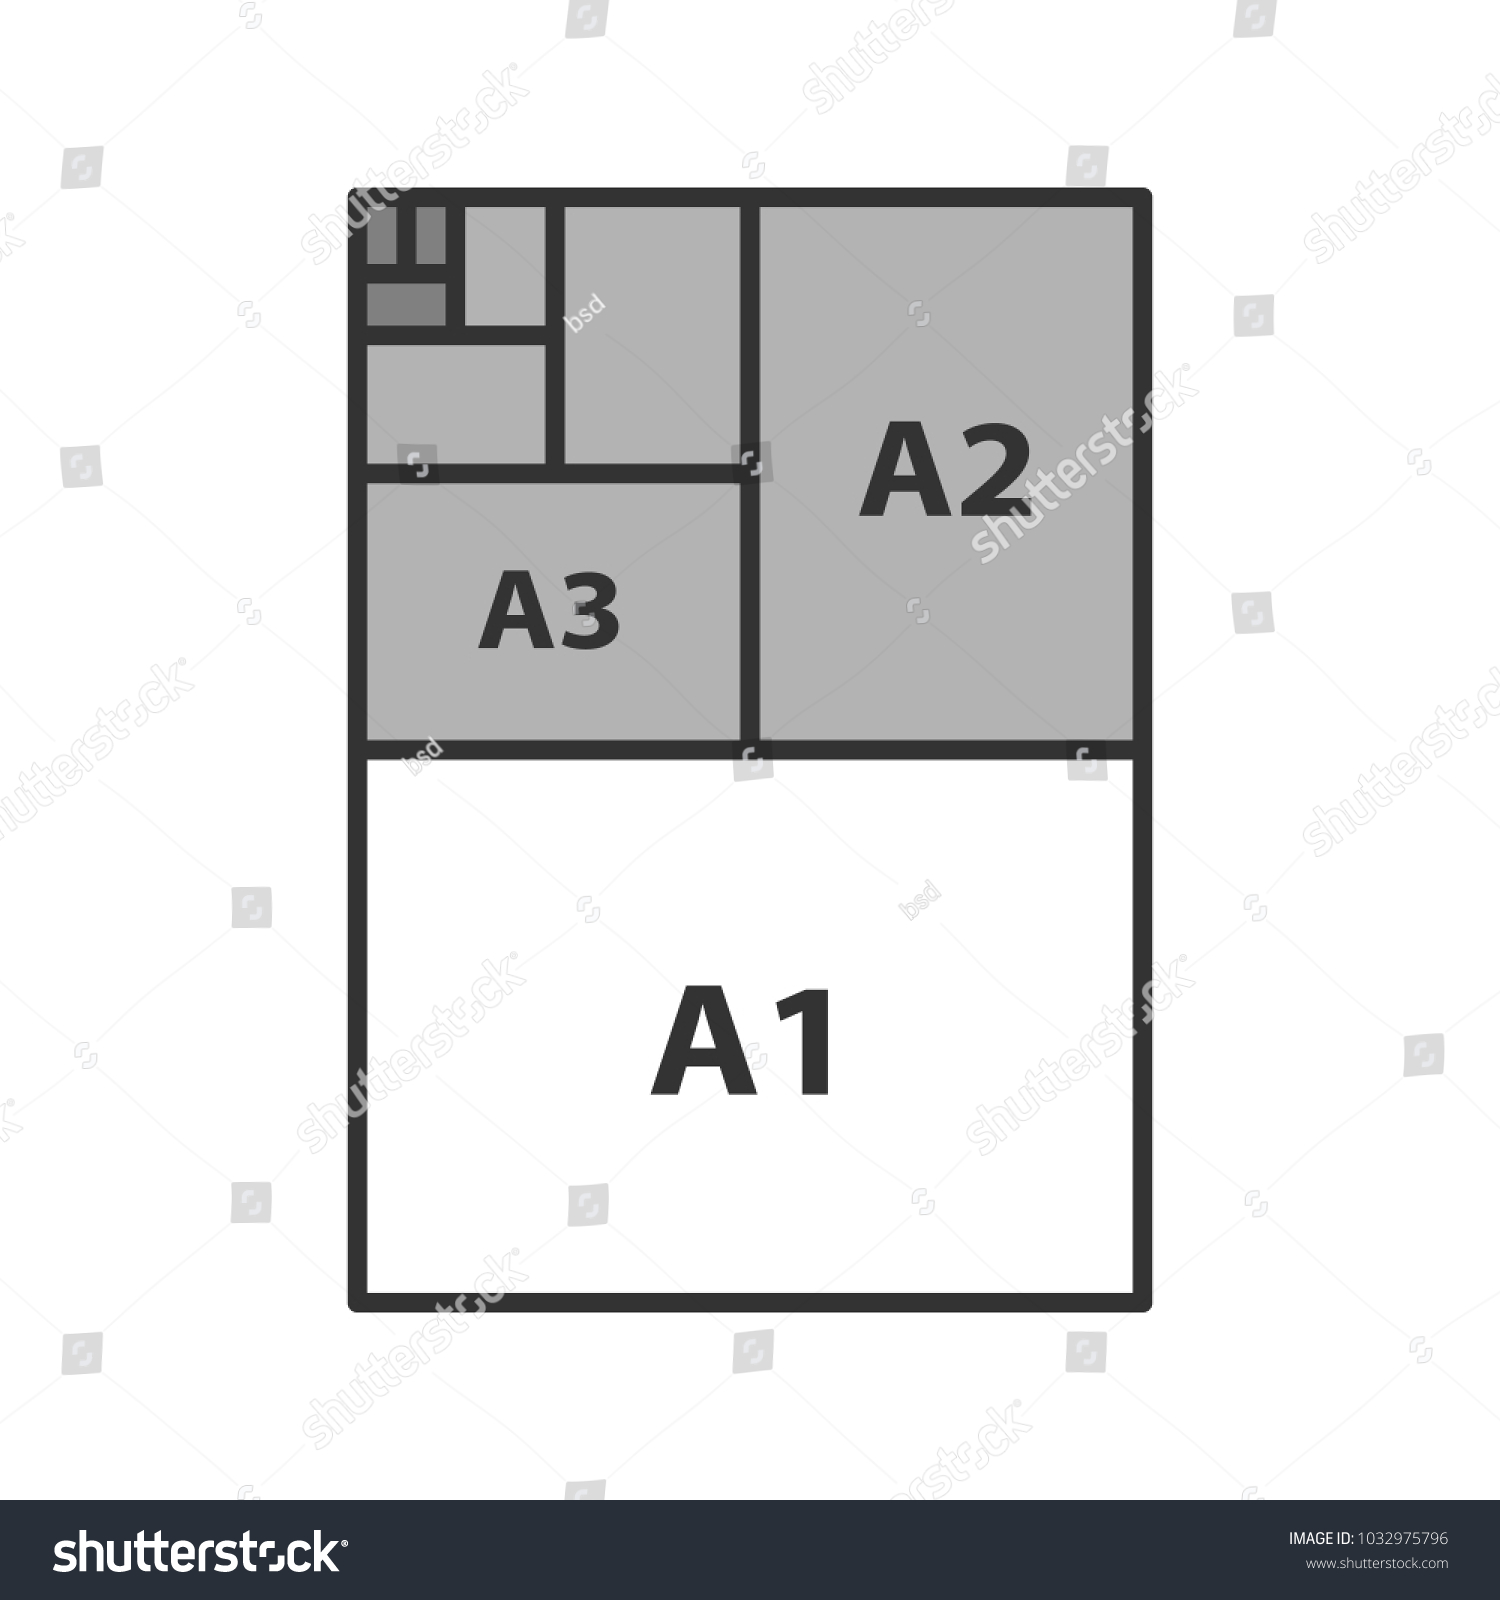 Paper sizes color icon. Paper sheet formats. A3, A1, A2. Isolated vector illustration #1032975796